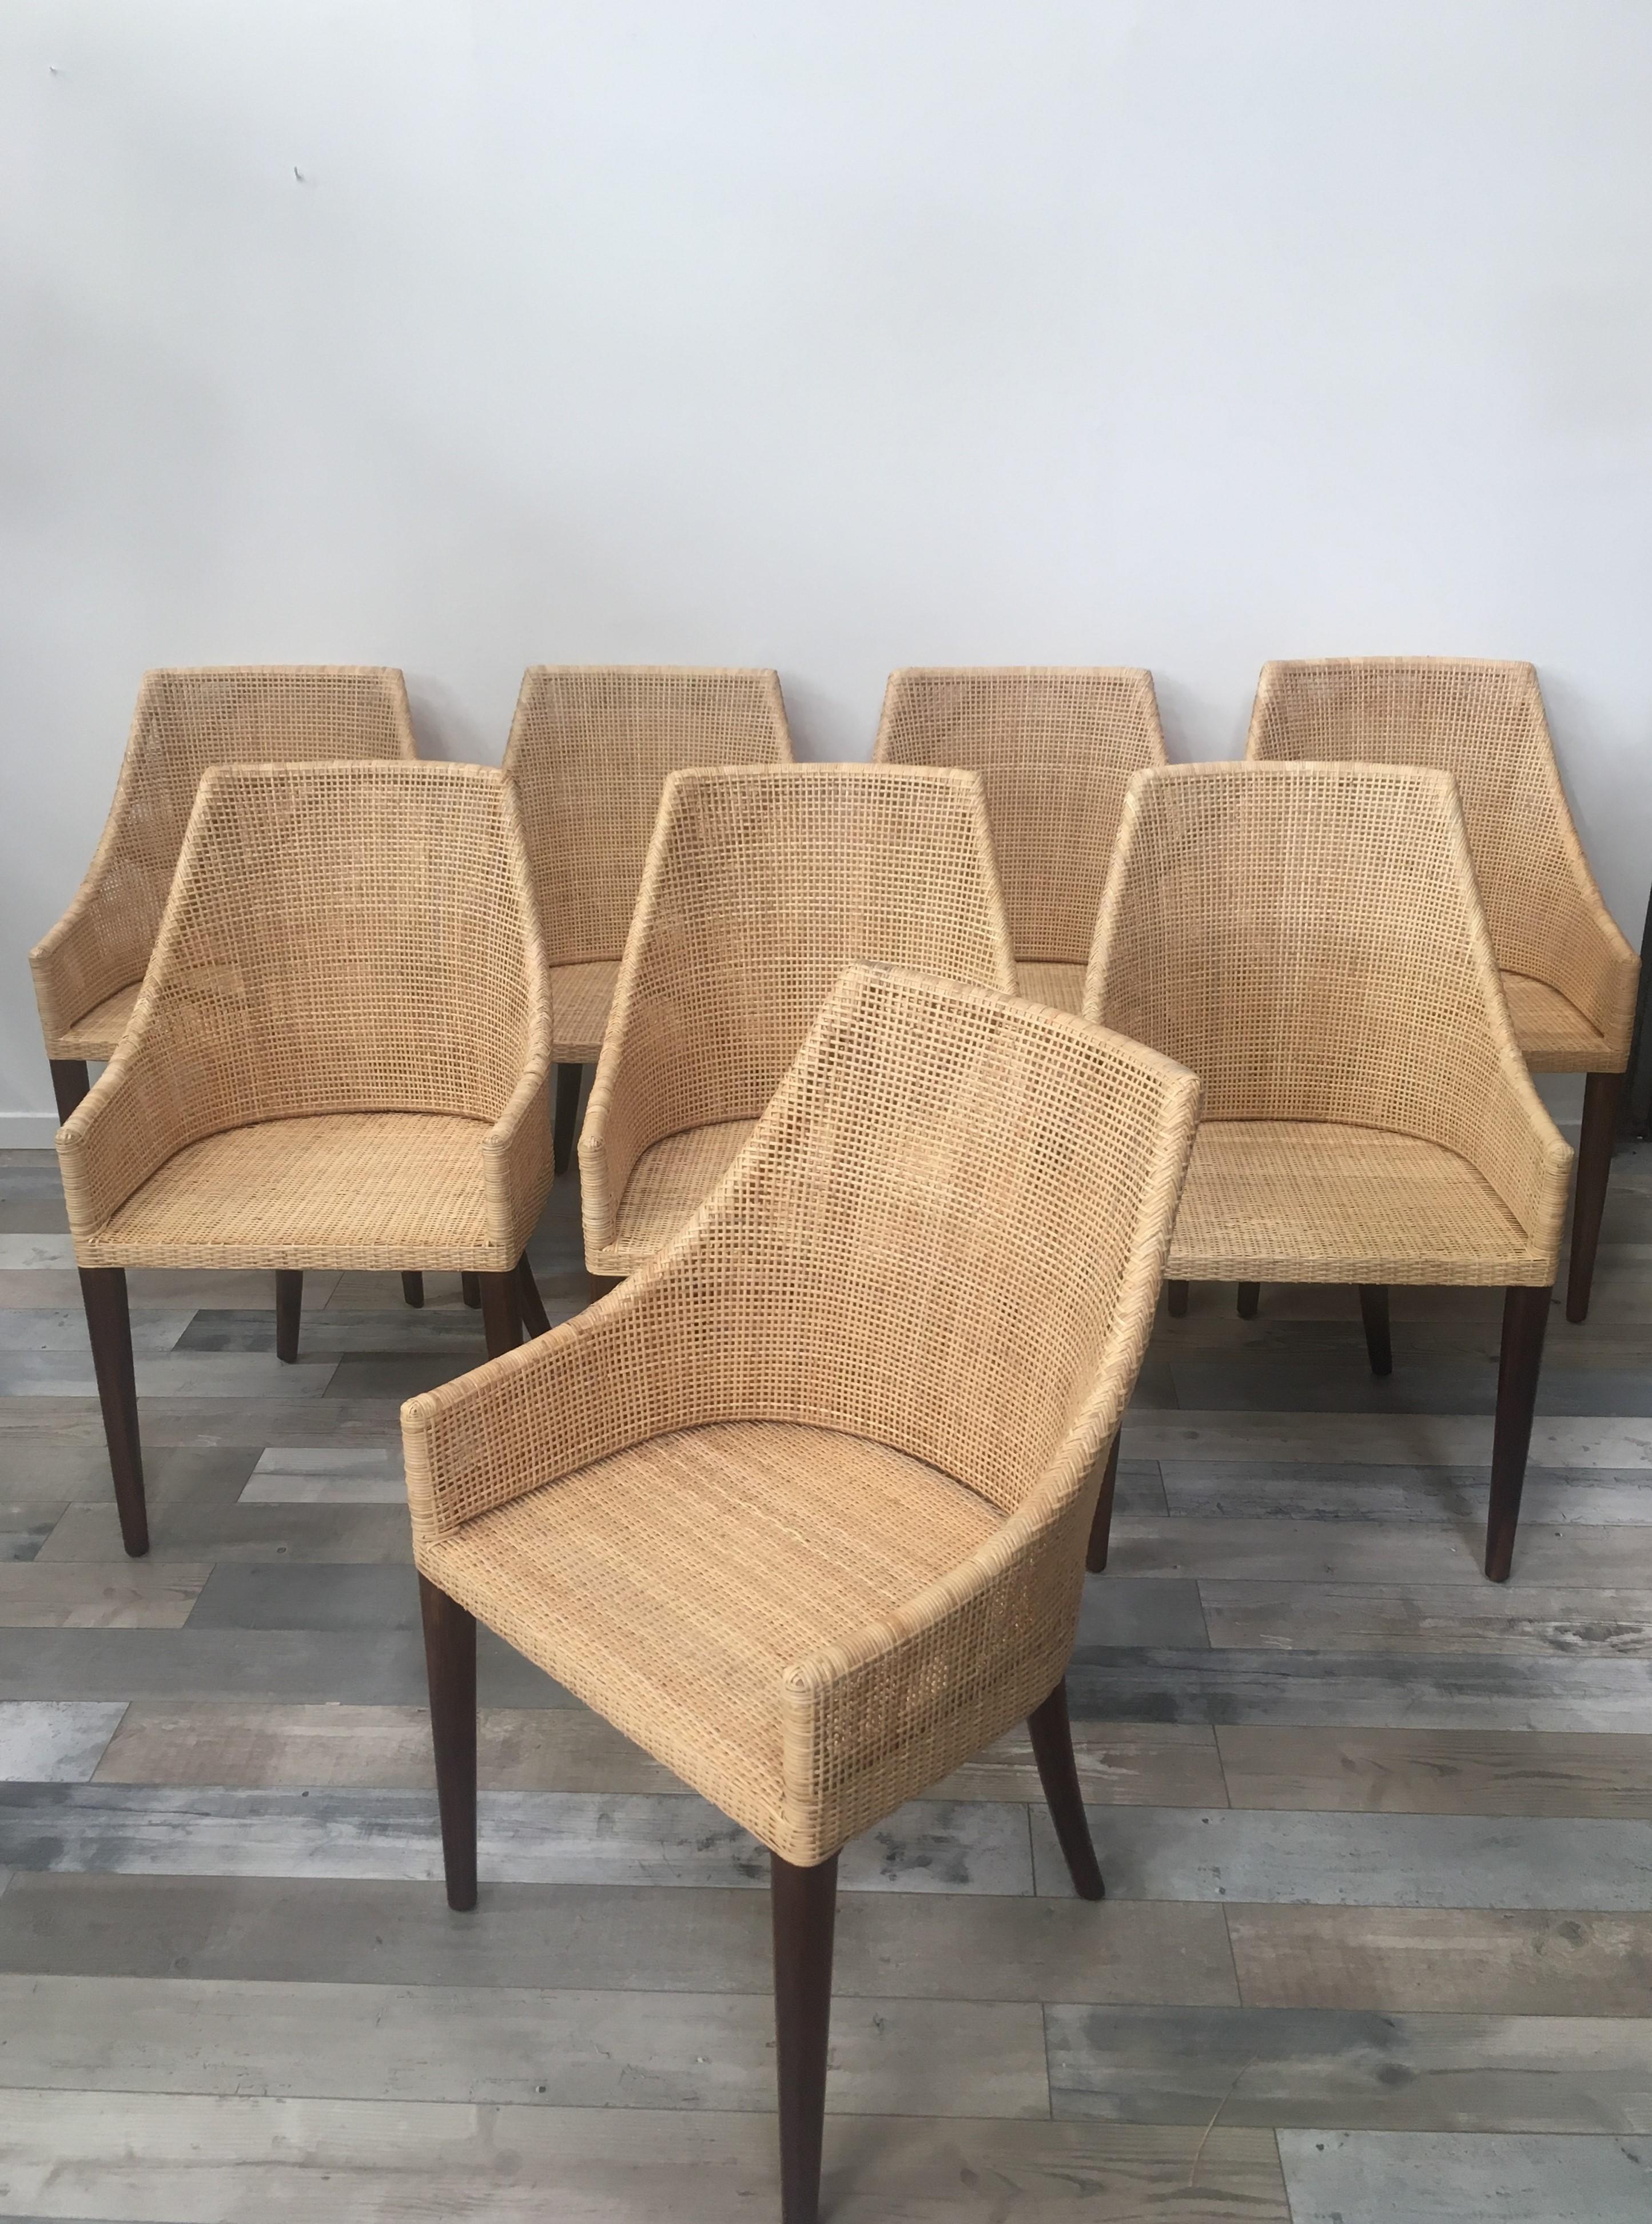 Elegant set of 8 rattan chairs combining quality, robustness and class. They will be perfect on your terrace, in your veranda, your winter garden, around the dining table and even in your office! In excellent condition (new items, never used).